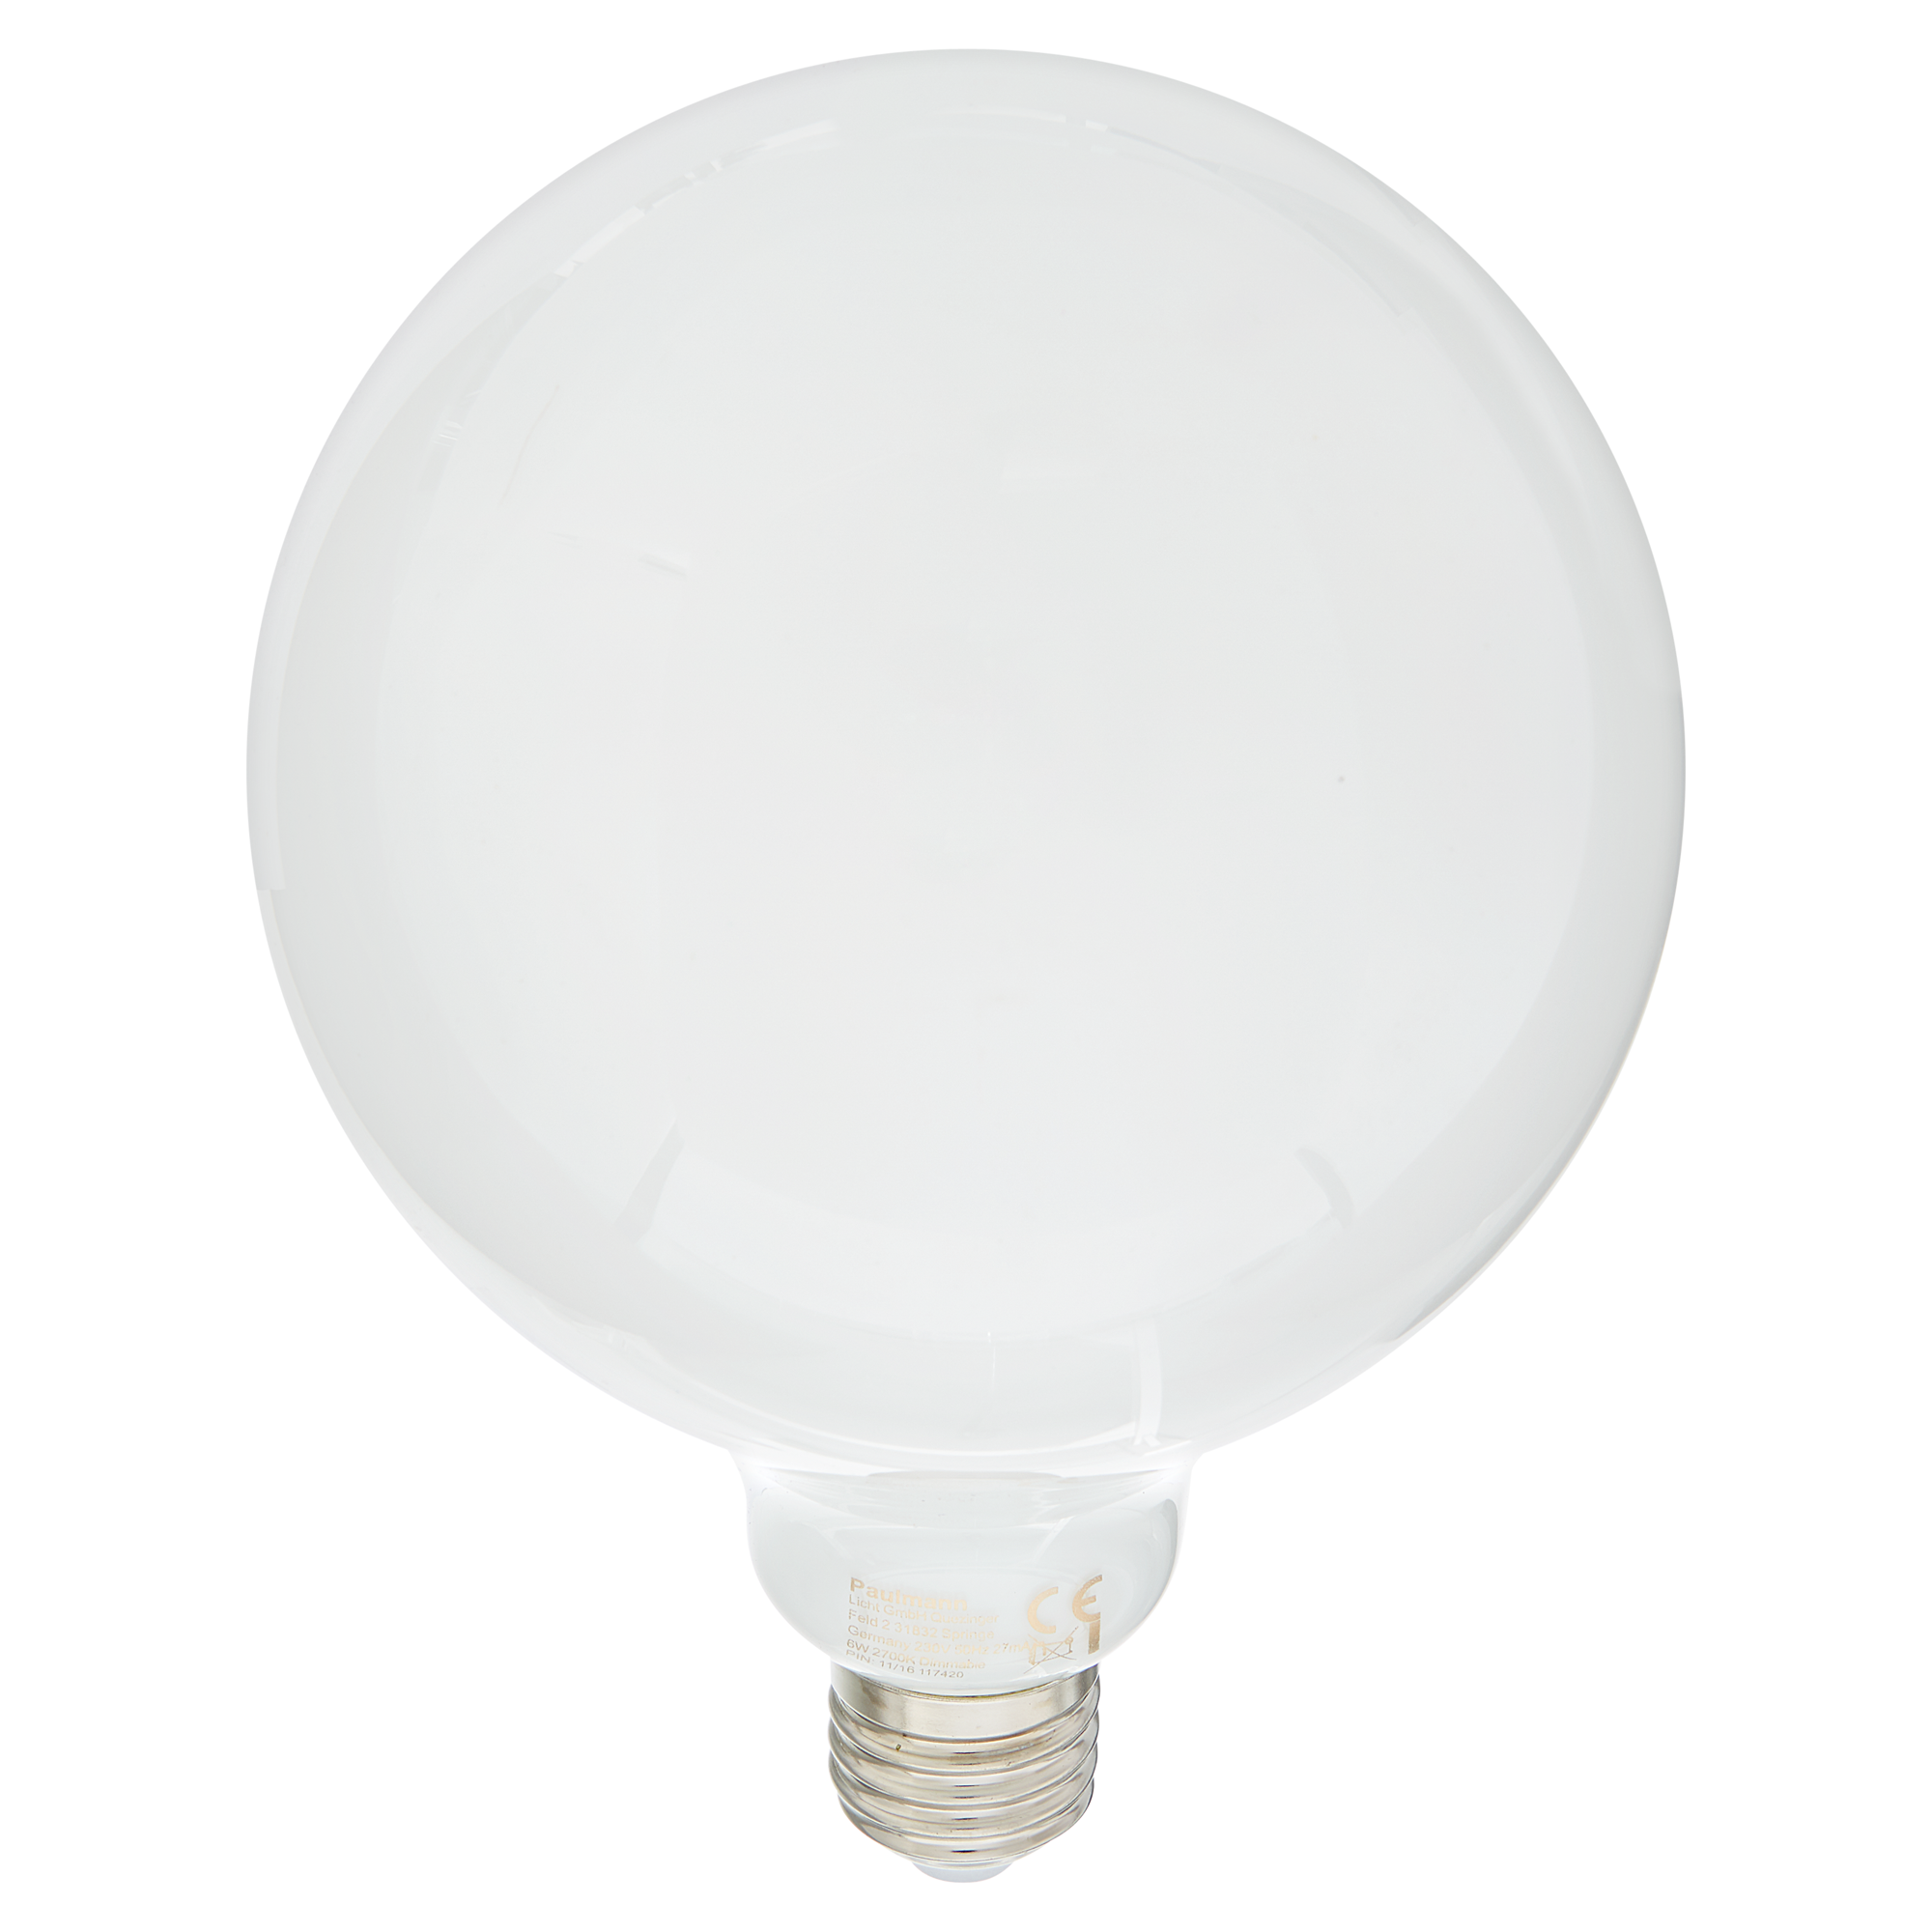 LED-Lampe Tropfen weiß 6 W Ø 120 x 173 mm + product picture